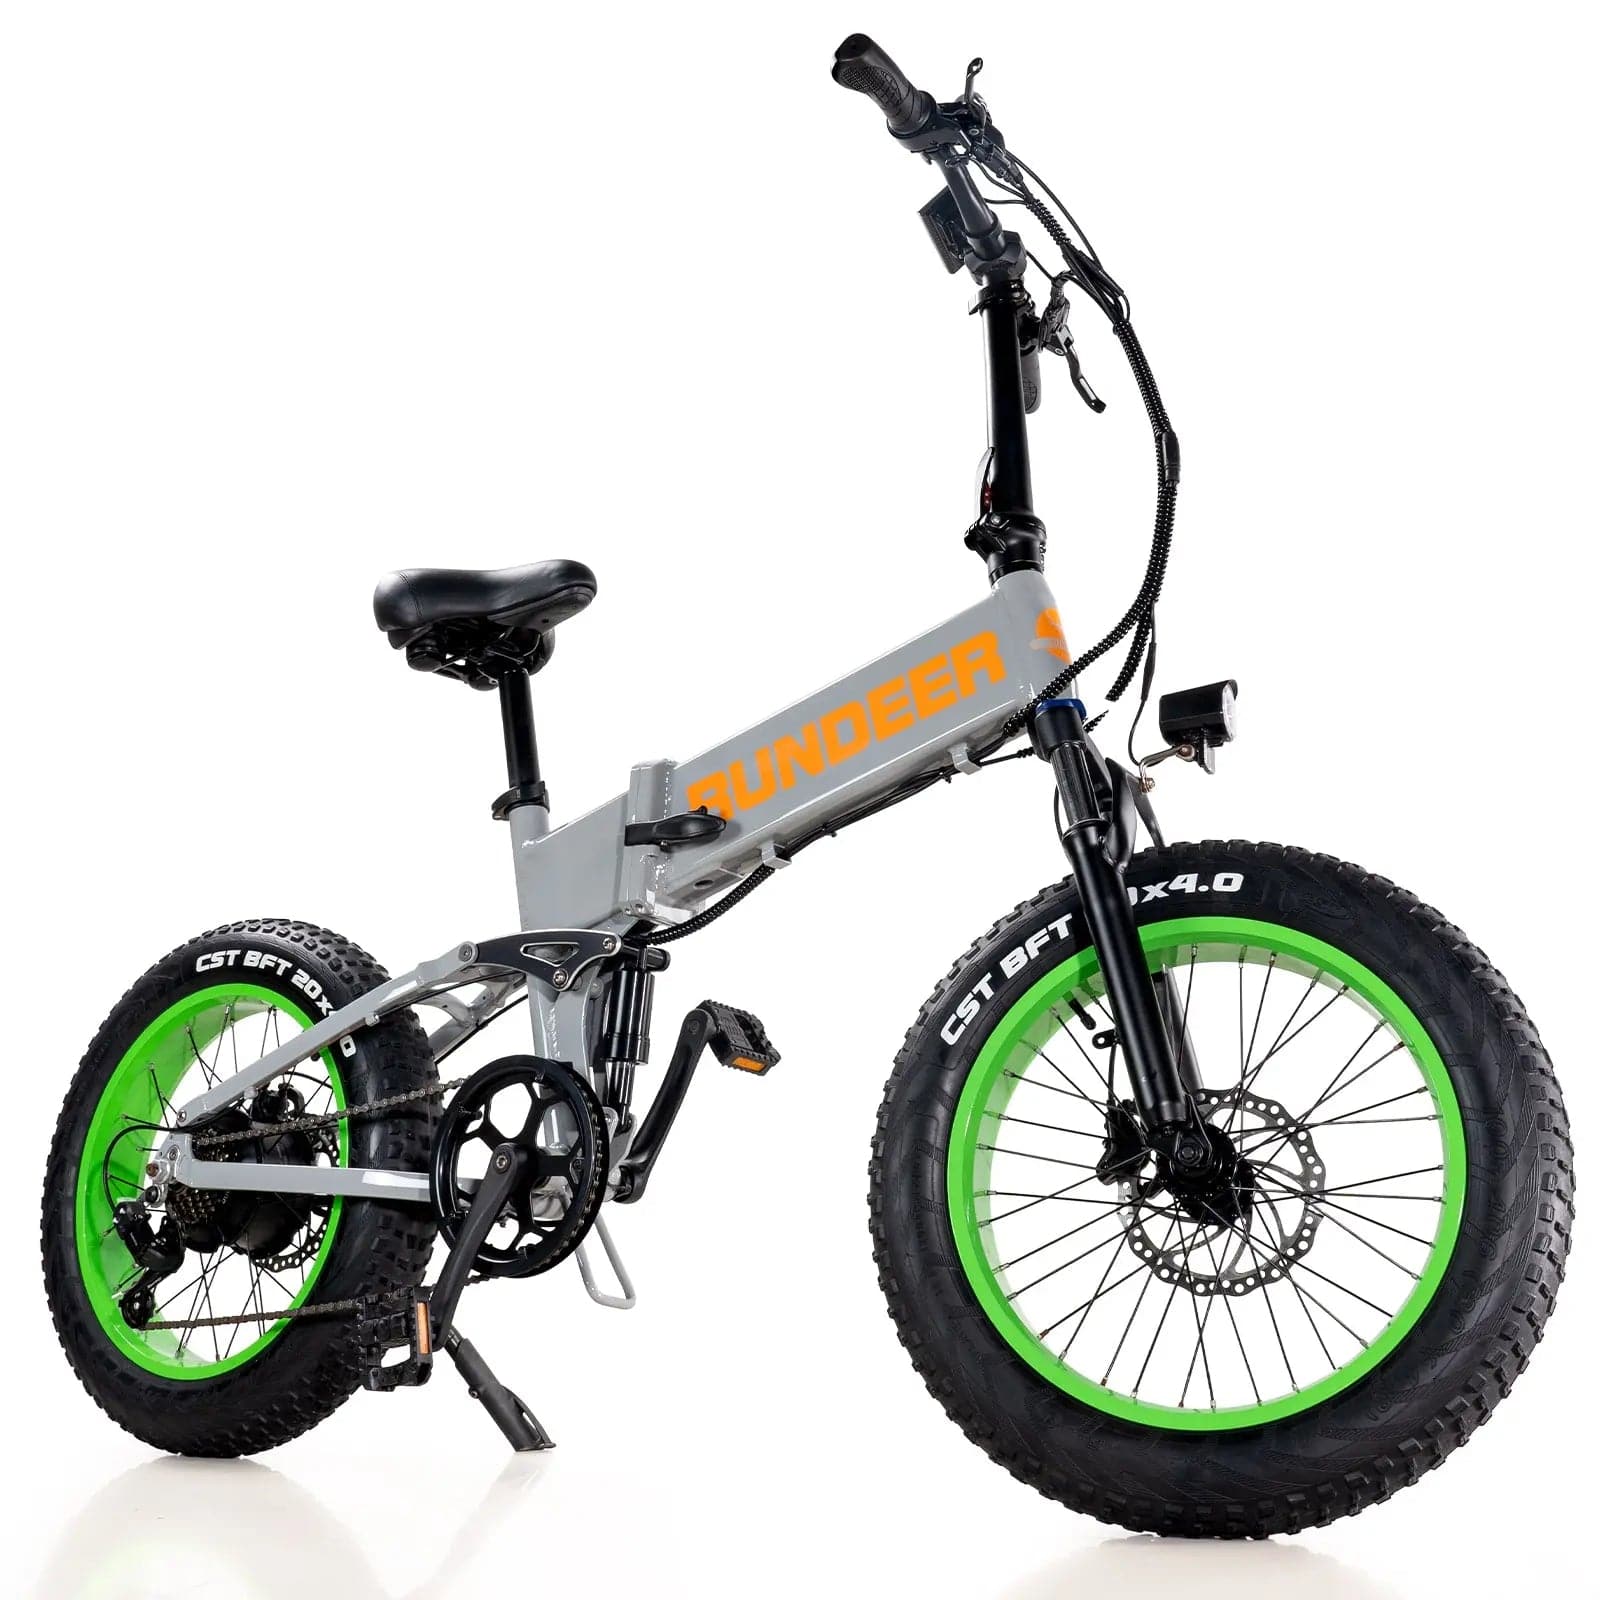 The RUNDEER Hummer eBike is perfect for tackling any terrain. This full suspension fat tire electric bike is constructed with a 6061 aluminum frame and features a 750 watt motor for excellent power and torque. With a 48-volt 15Ah battery for long-lasting rides, you can take on the mountain with confidence. Enjoy the convenience and power of eBiking with the RUNDEER Hummer eBike.